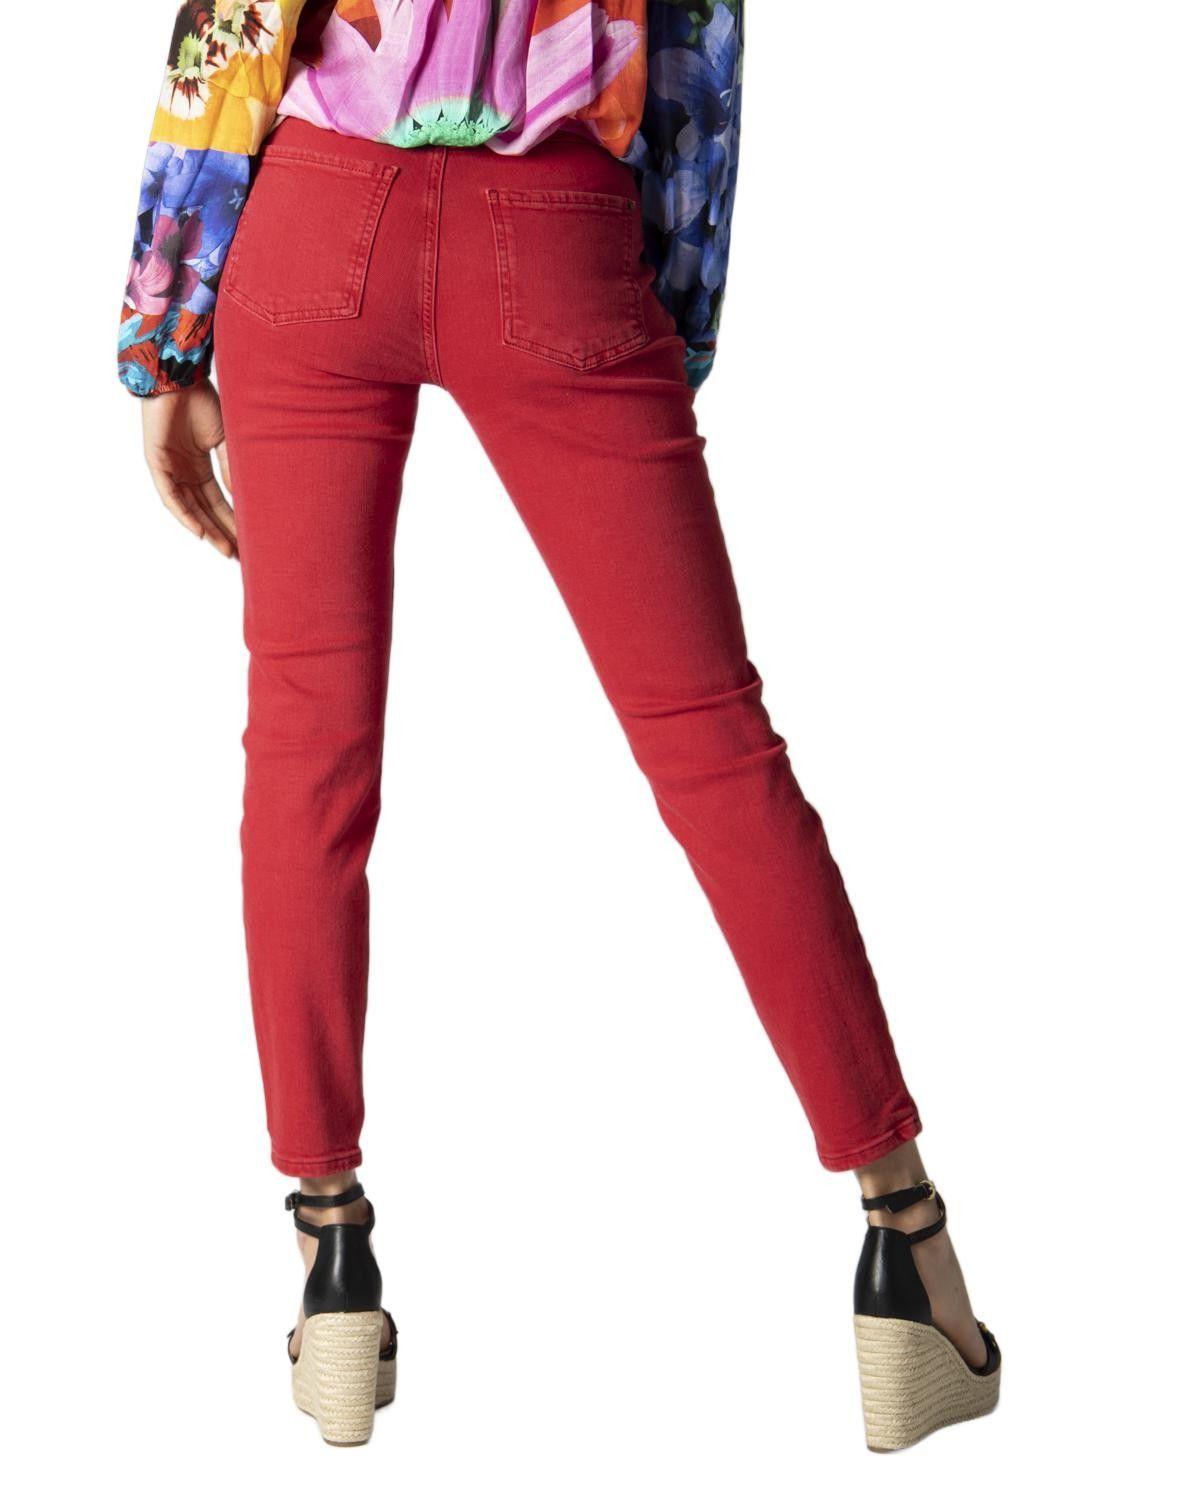 Desigual Red Plain Zip And Button Jeans | Lyst